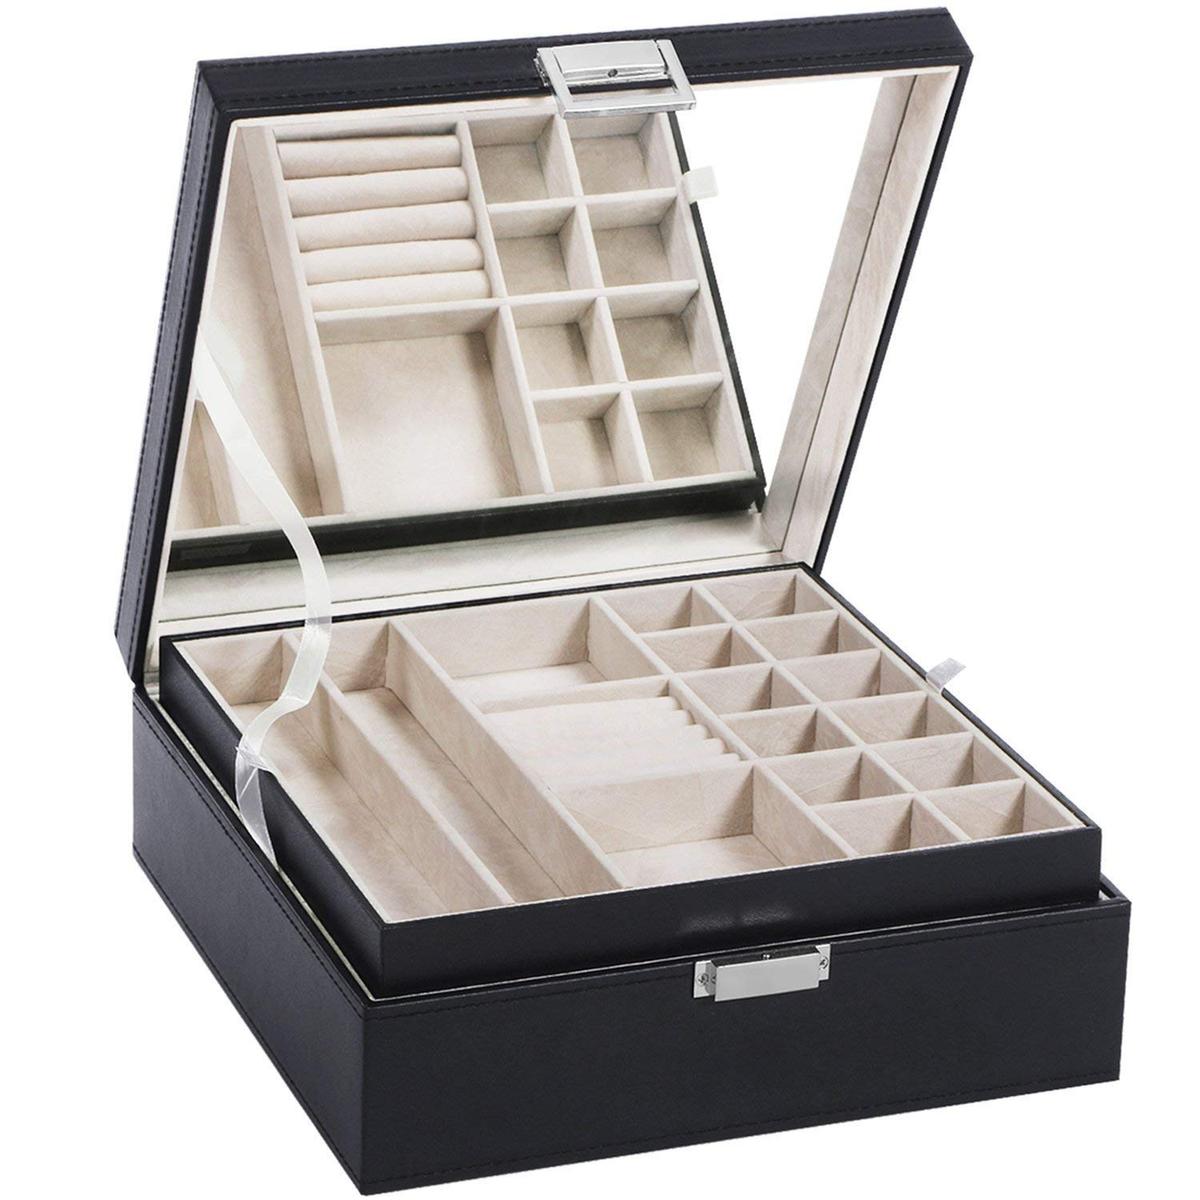 Jewelry Box Organizer 40 Section Display Tray Storage Case Drawer 2 Layers . $40 MSRP